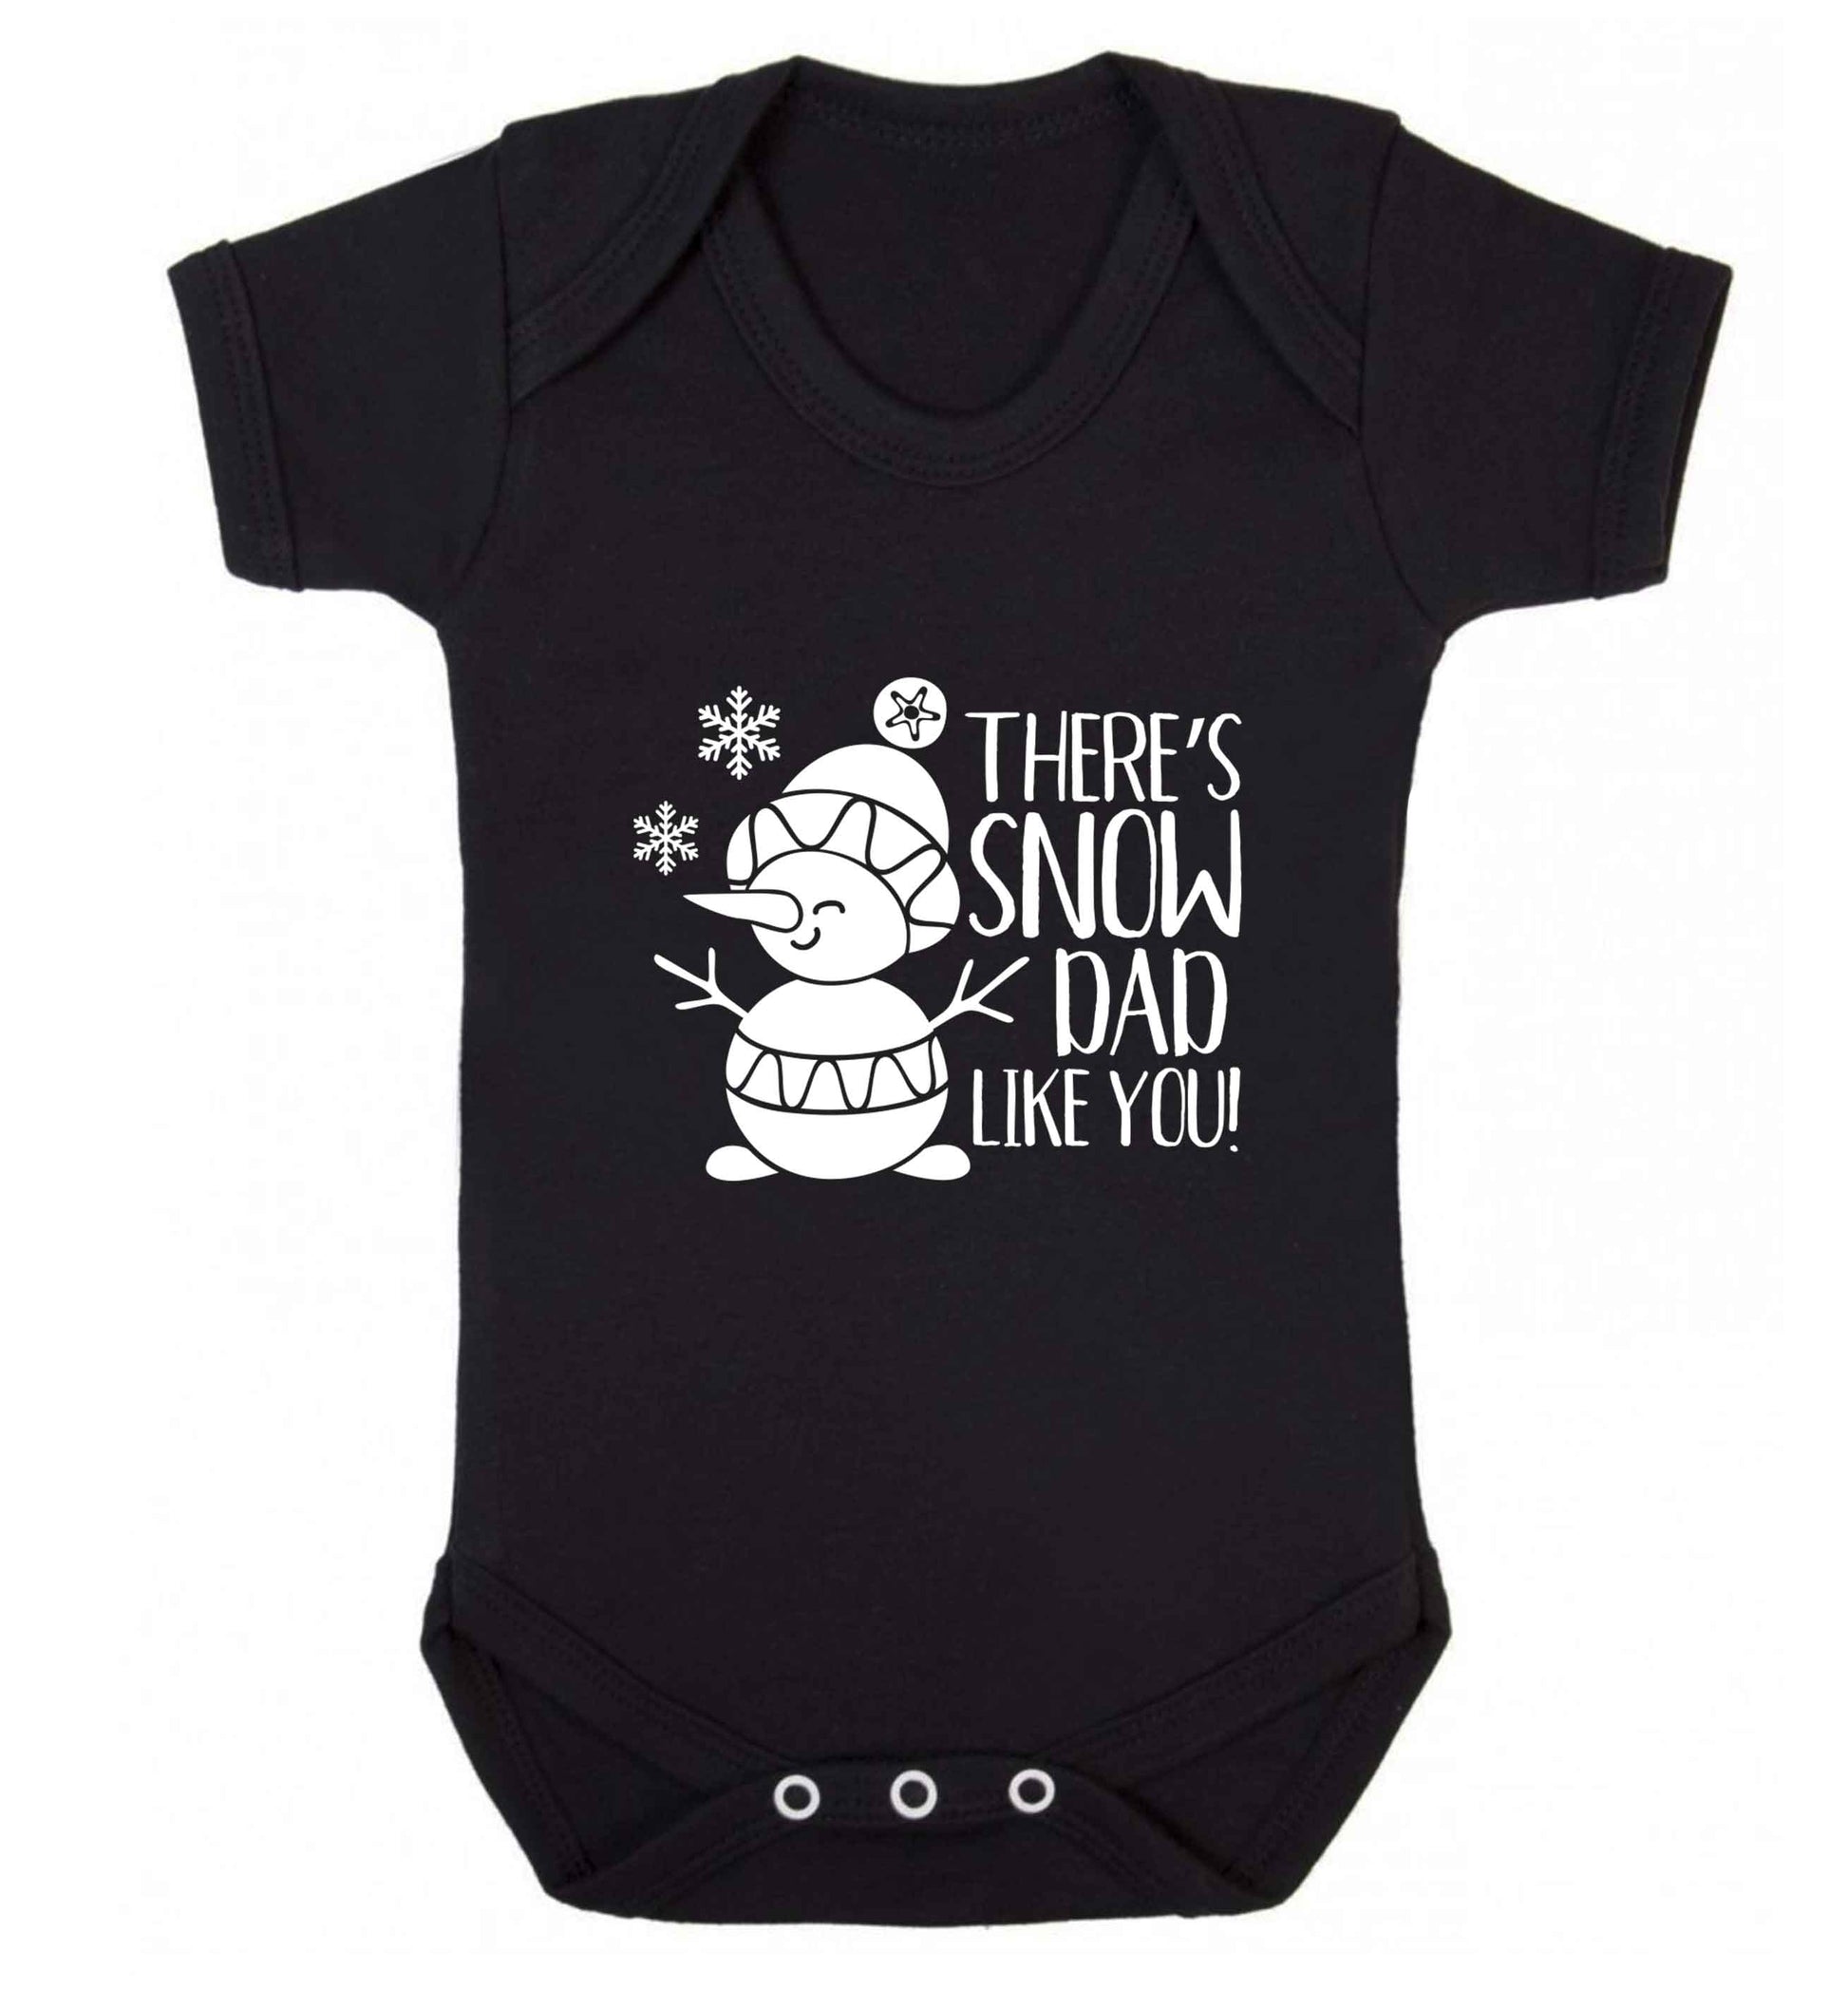 There's snow dad like you baby vest black 18-24 months